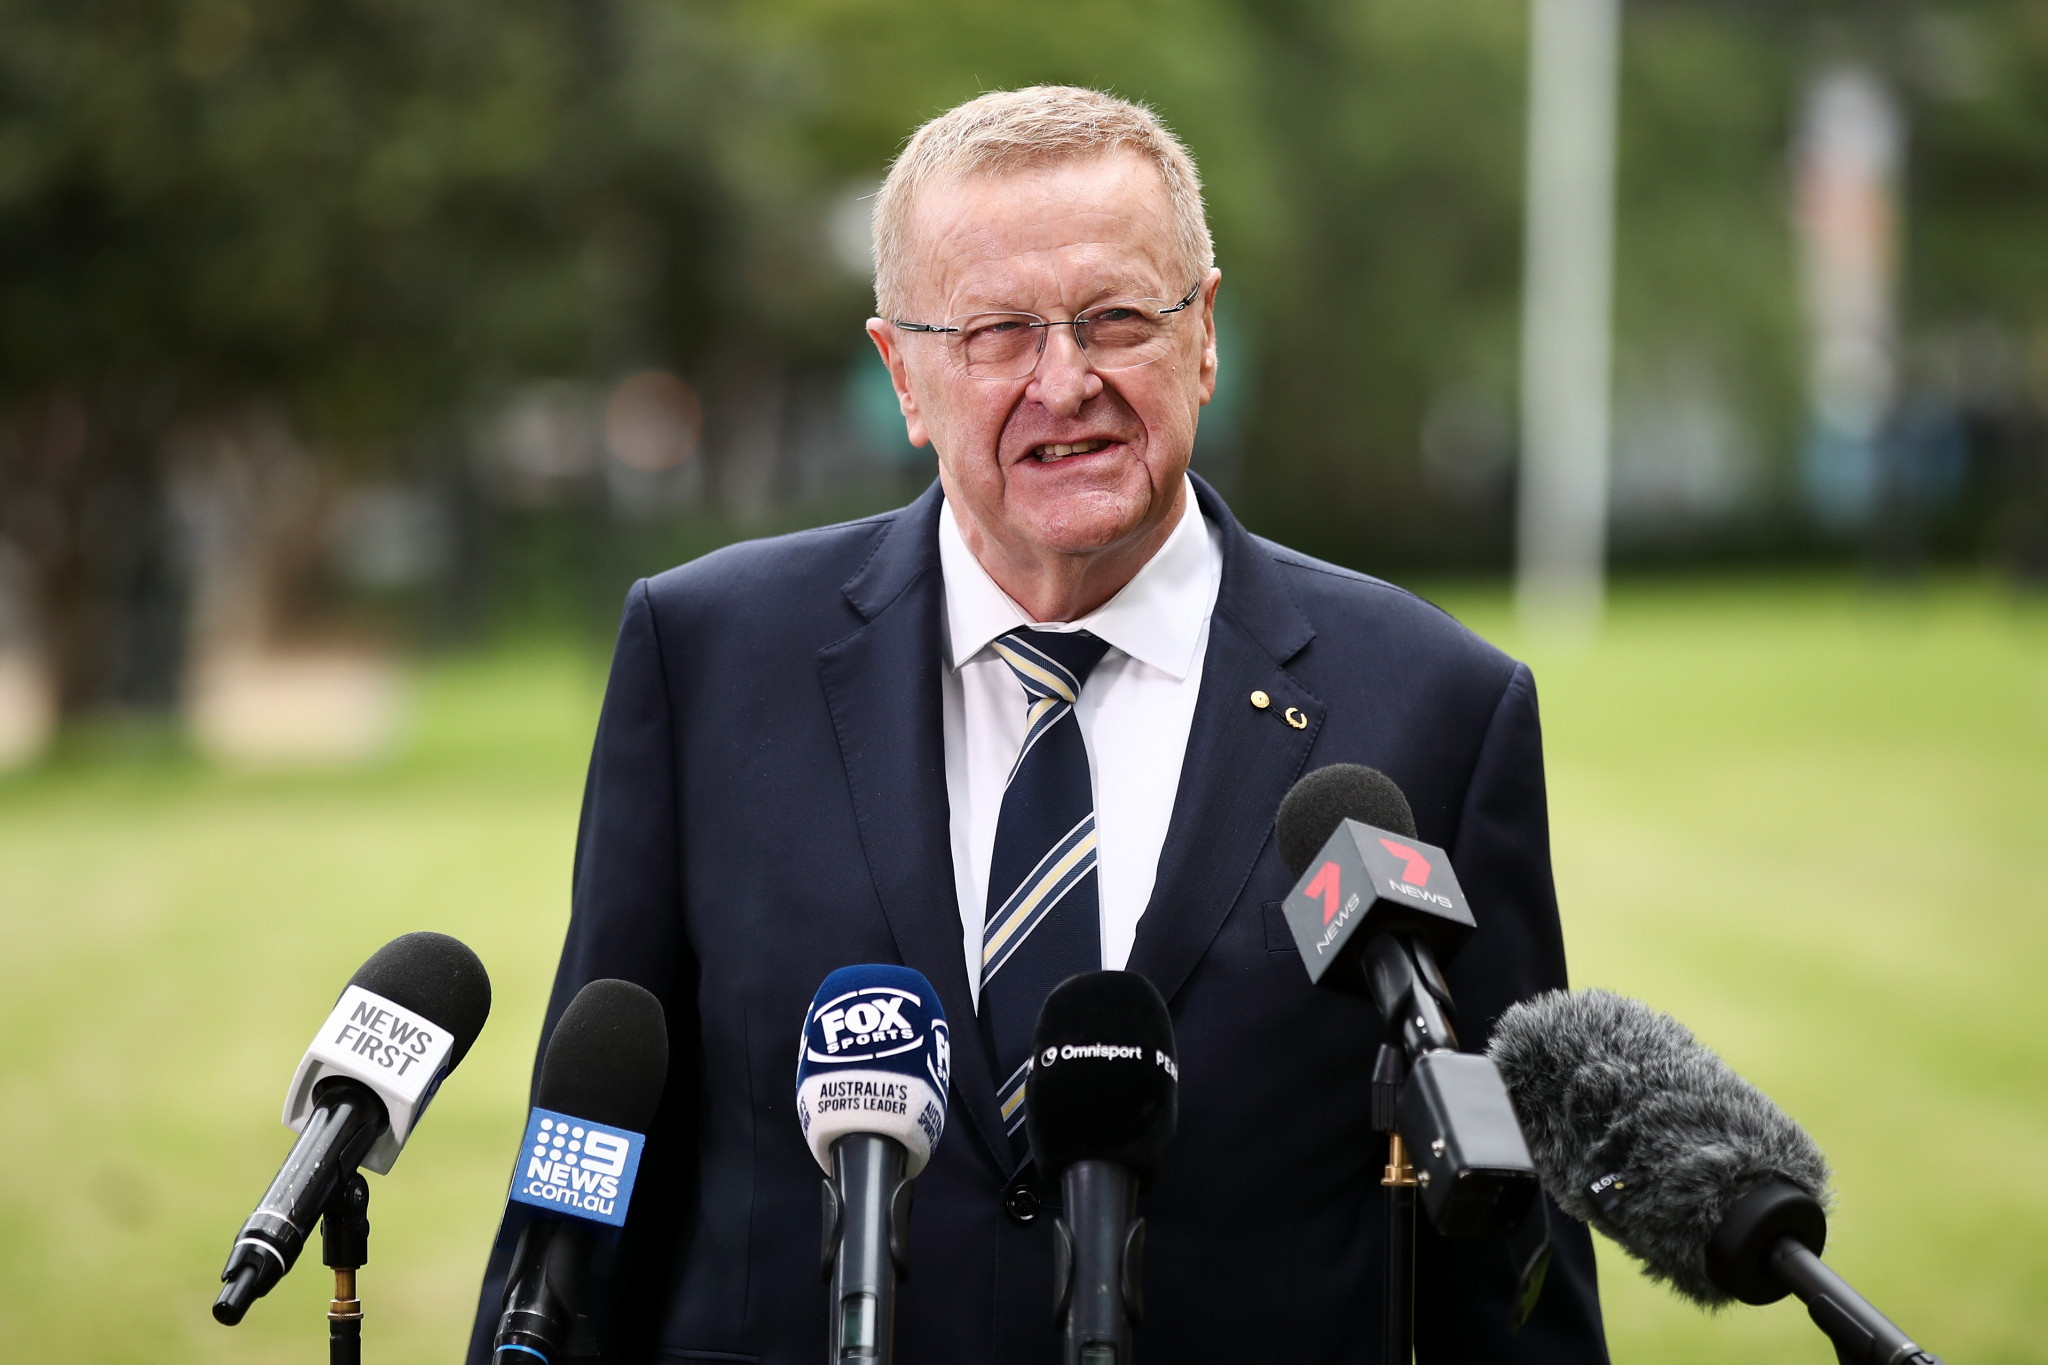 John Coates appears set to become Honorary Life President when he steps down as President ©Getty Images